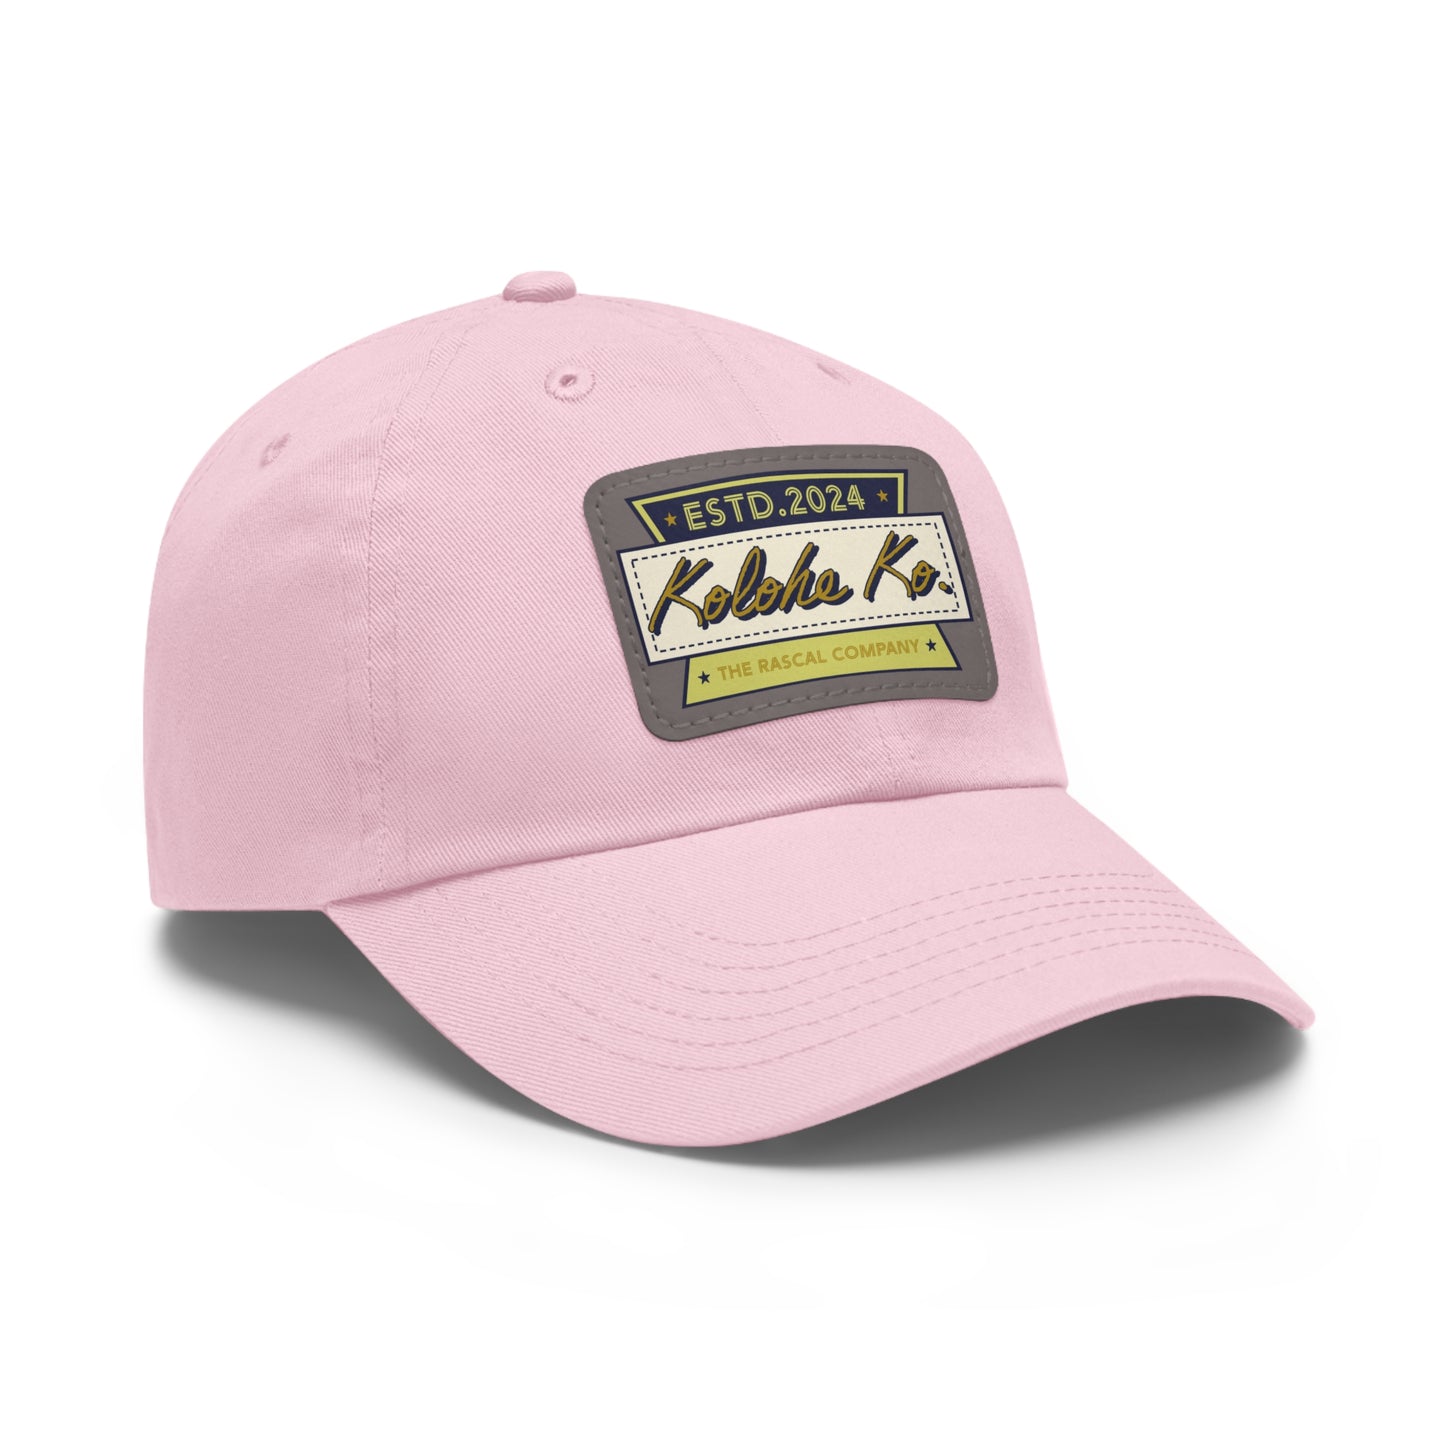 The Rascal Company Logo Dad Hat with Leather Patch (Rectangle) | 17 Variations to Choose | Kolohe Ko